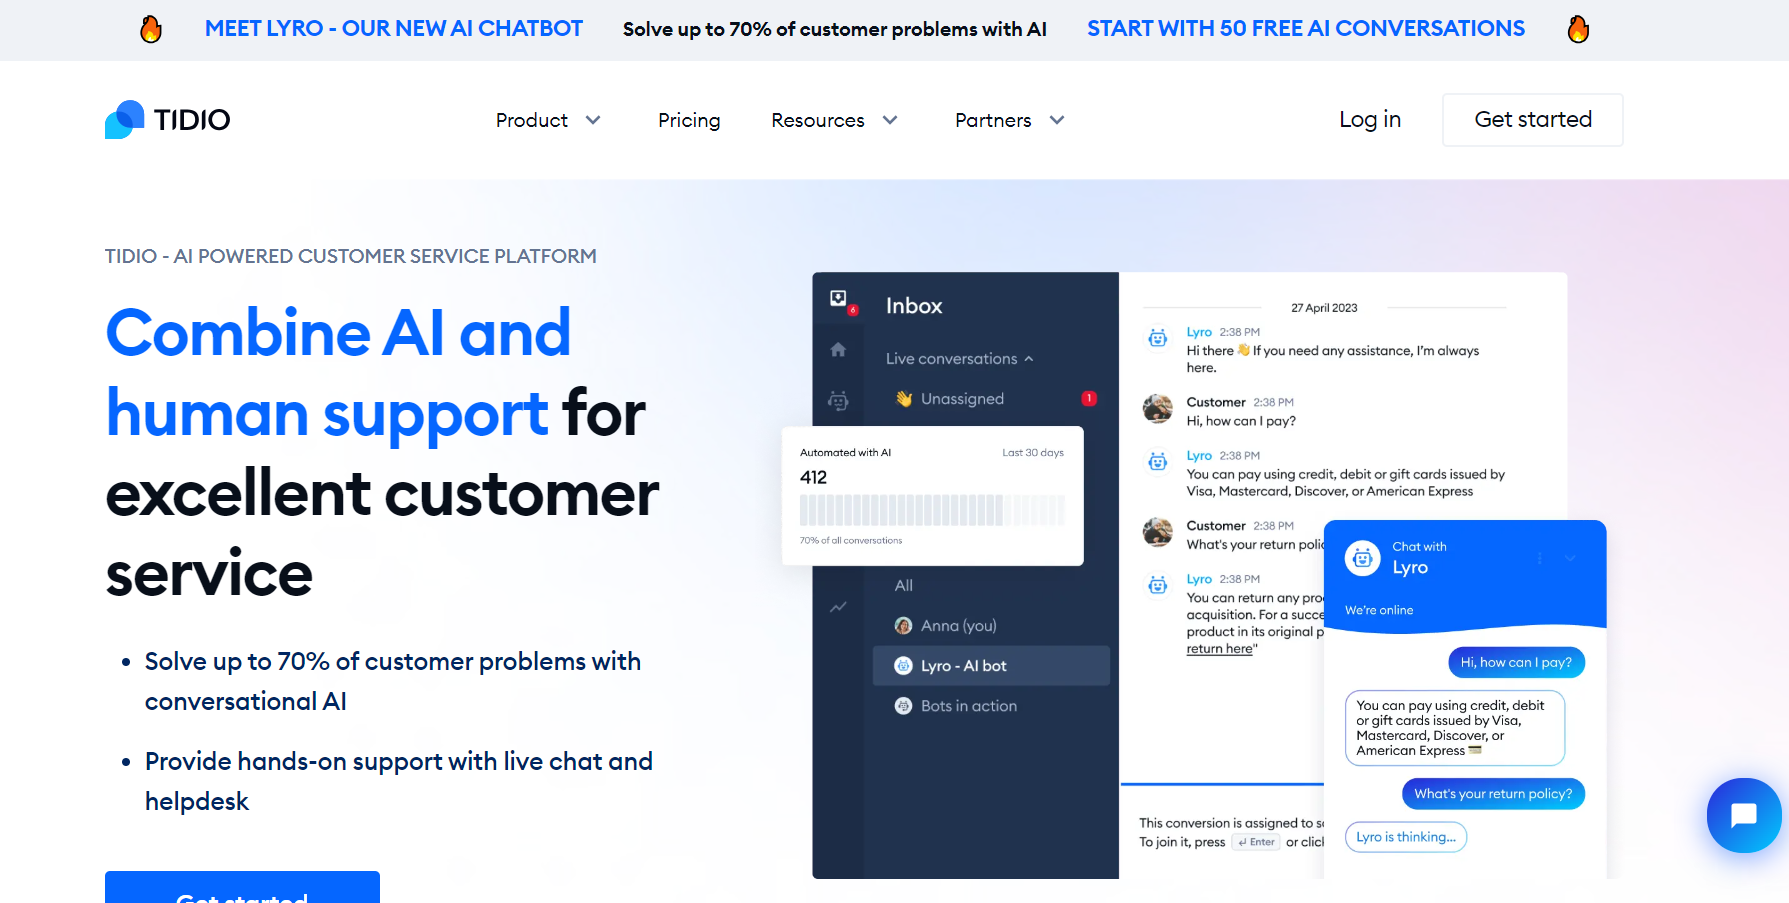 Tidio to seamlessly manage all my messaging from different platforms. Additionally, their chatbot and AI tools enable me to provide instant responses to my customers, ensuring they don't have to wait.